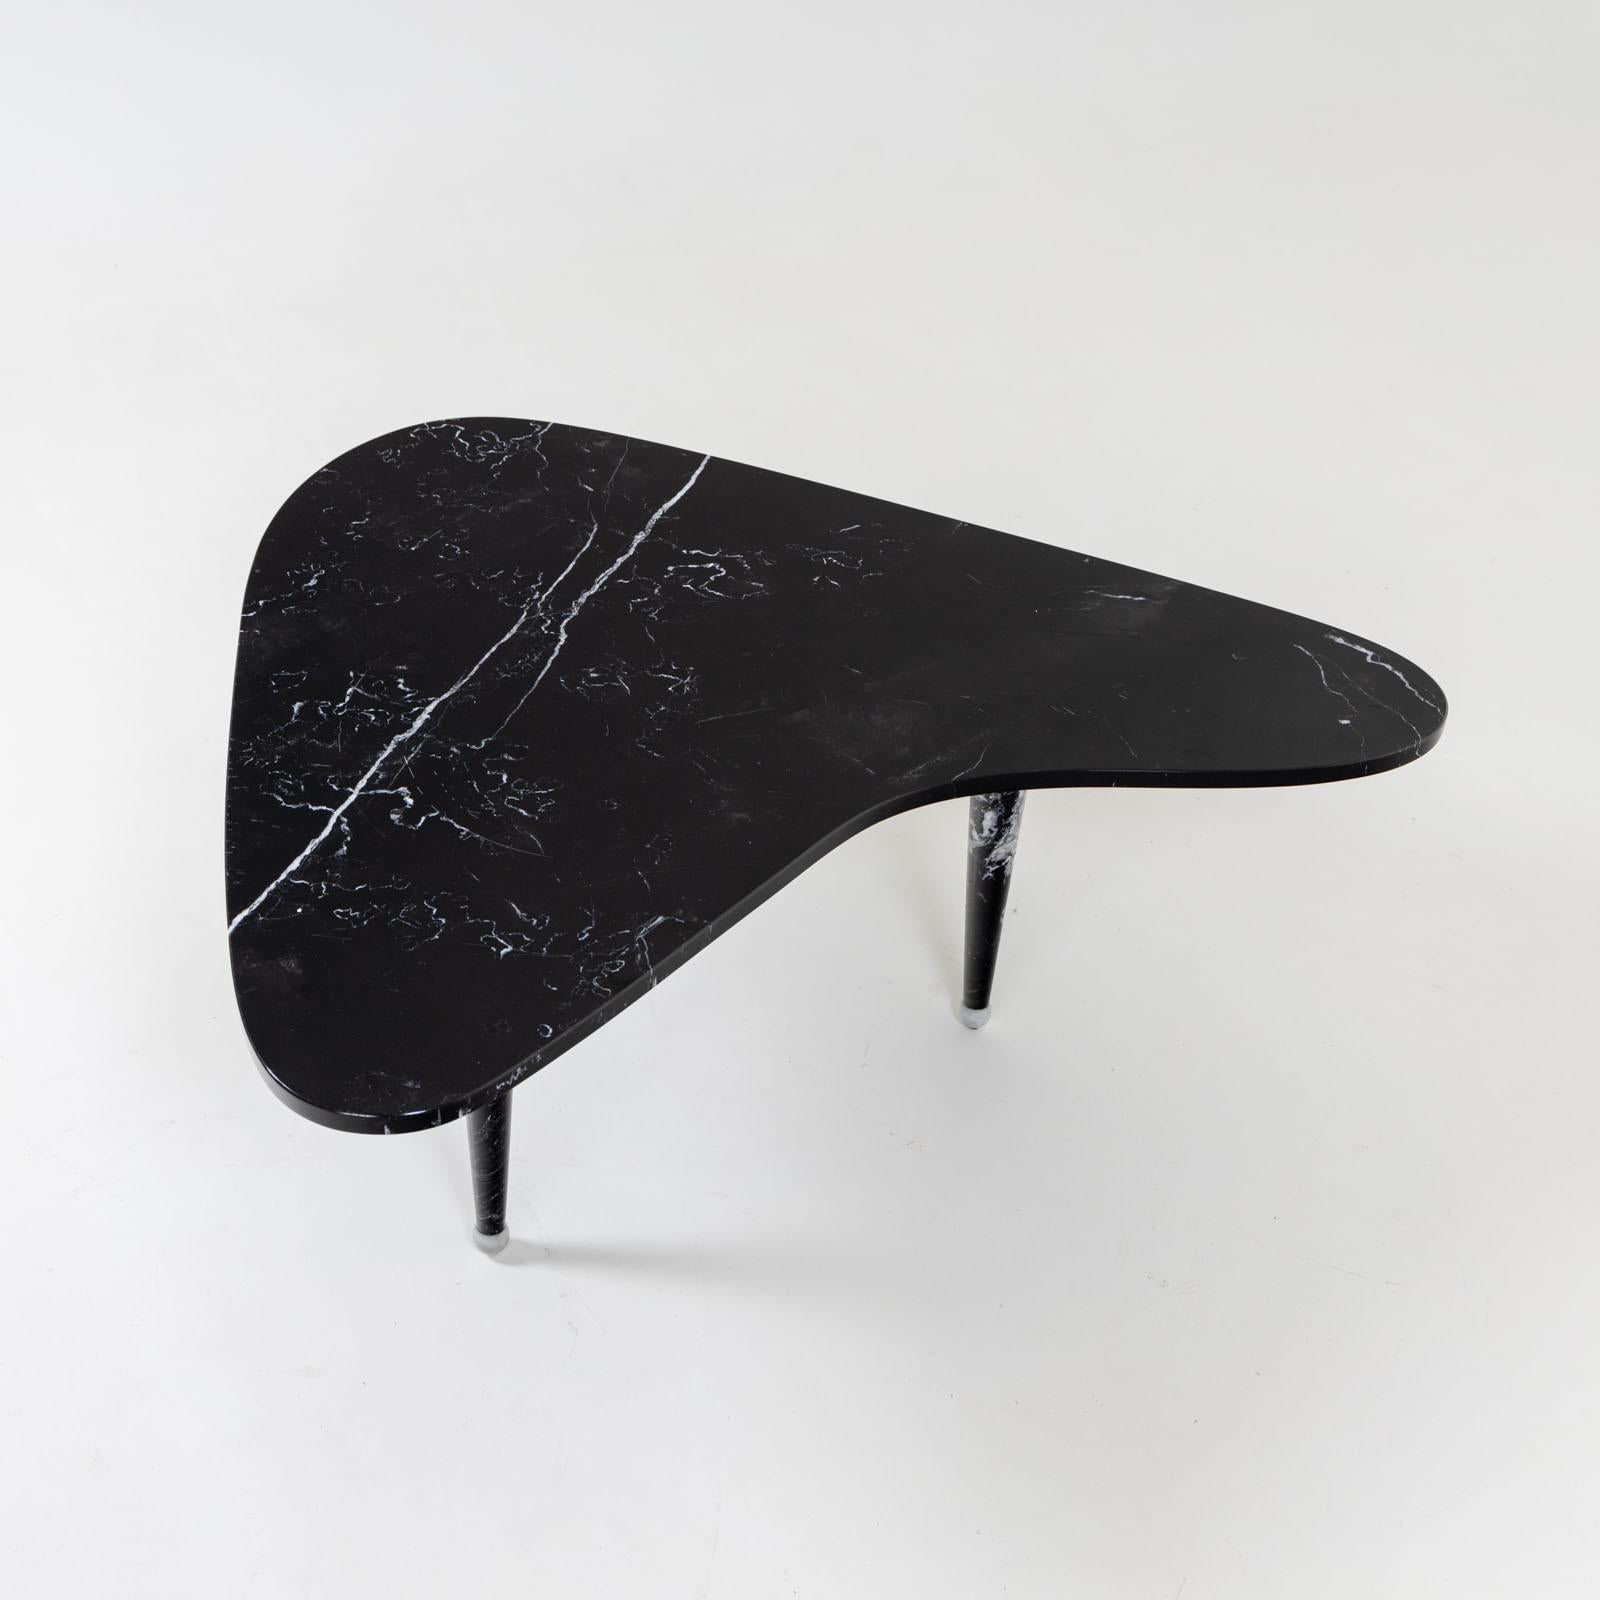 Italian coffee table with a boomerang-shaped top made of black marble with white veins.
The table stands on three conical legs, which are also made of black marble.